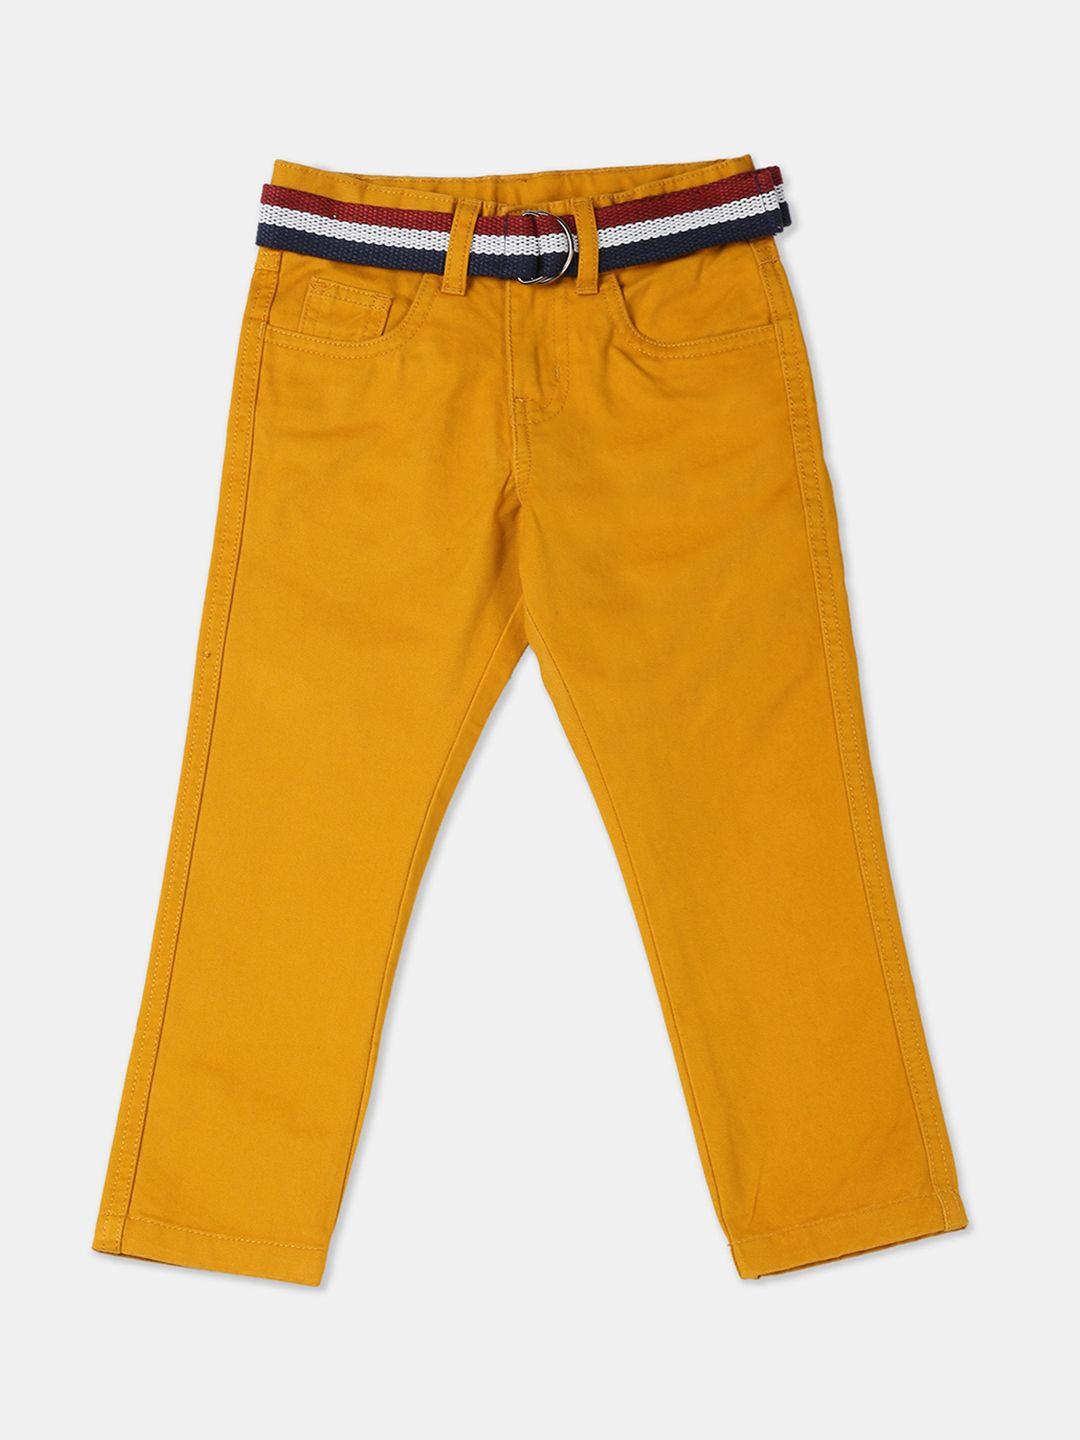 cherokee-boys-mustard-yellow-pure-cotton-regular-fit-solid-trousers